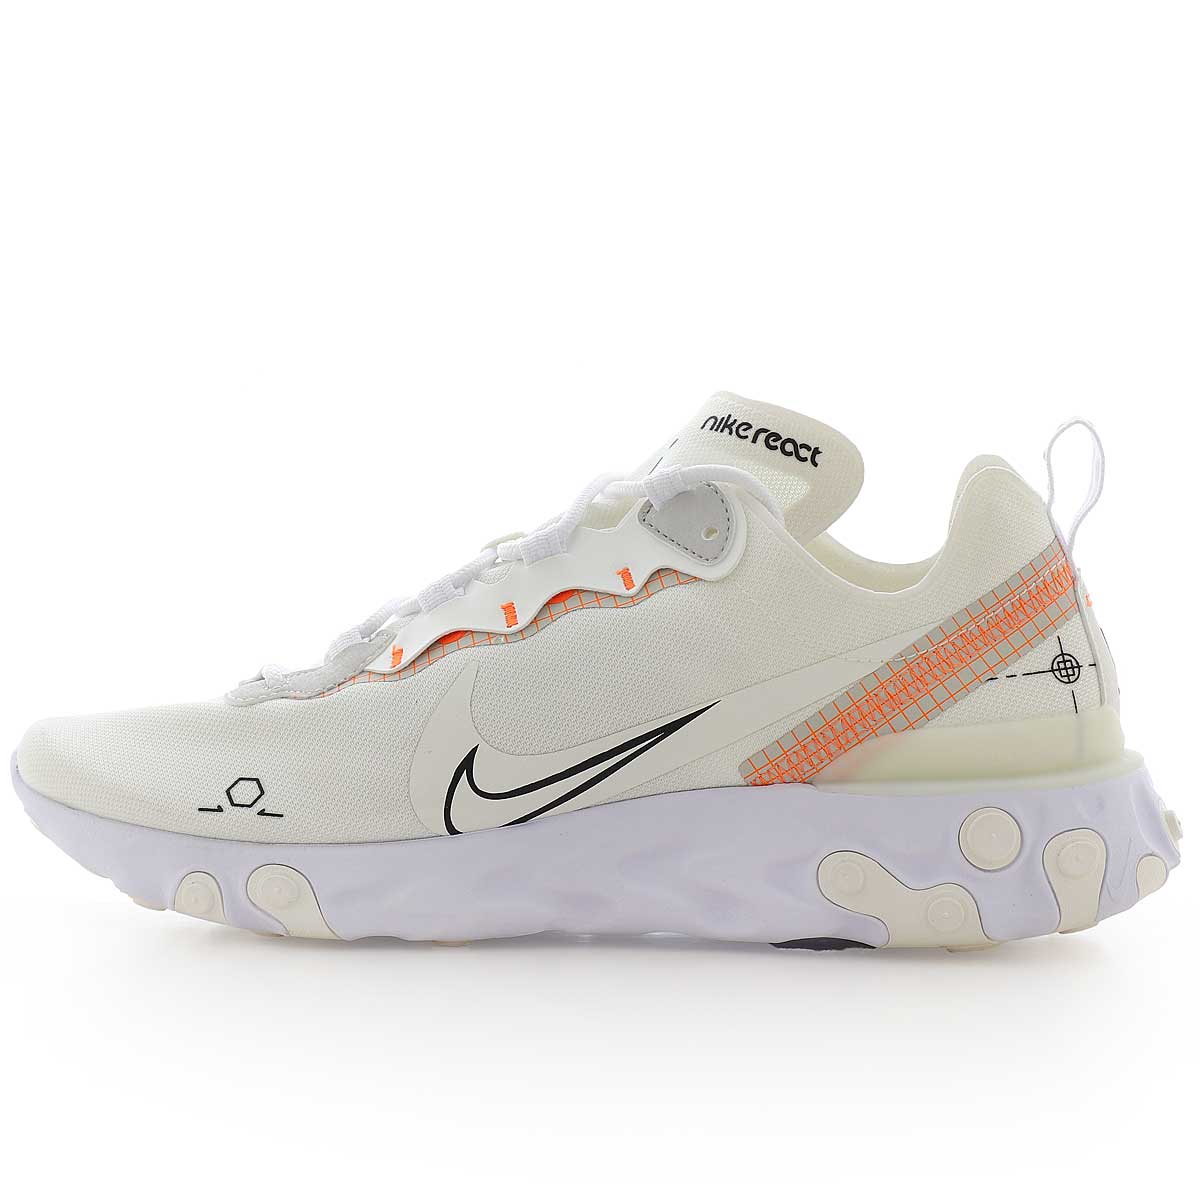 Buy REACT ELEMENT 55 for N/A 0.0 on 